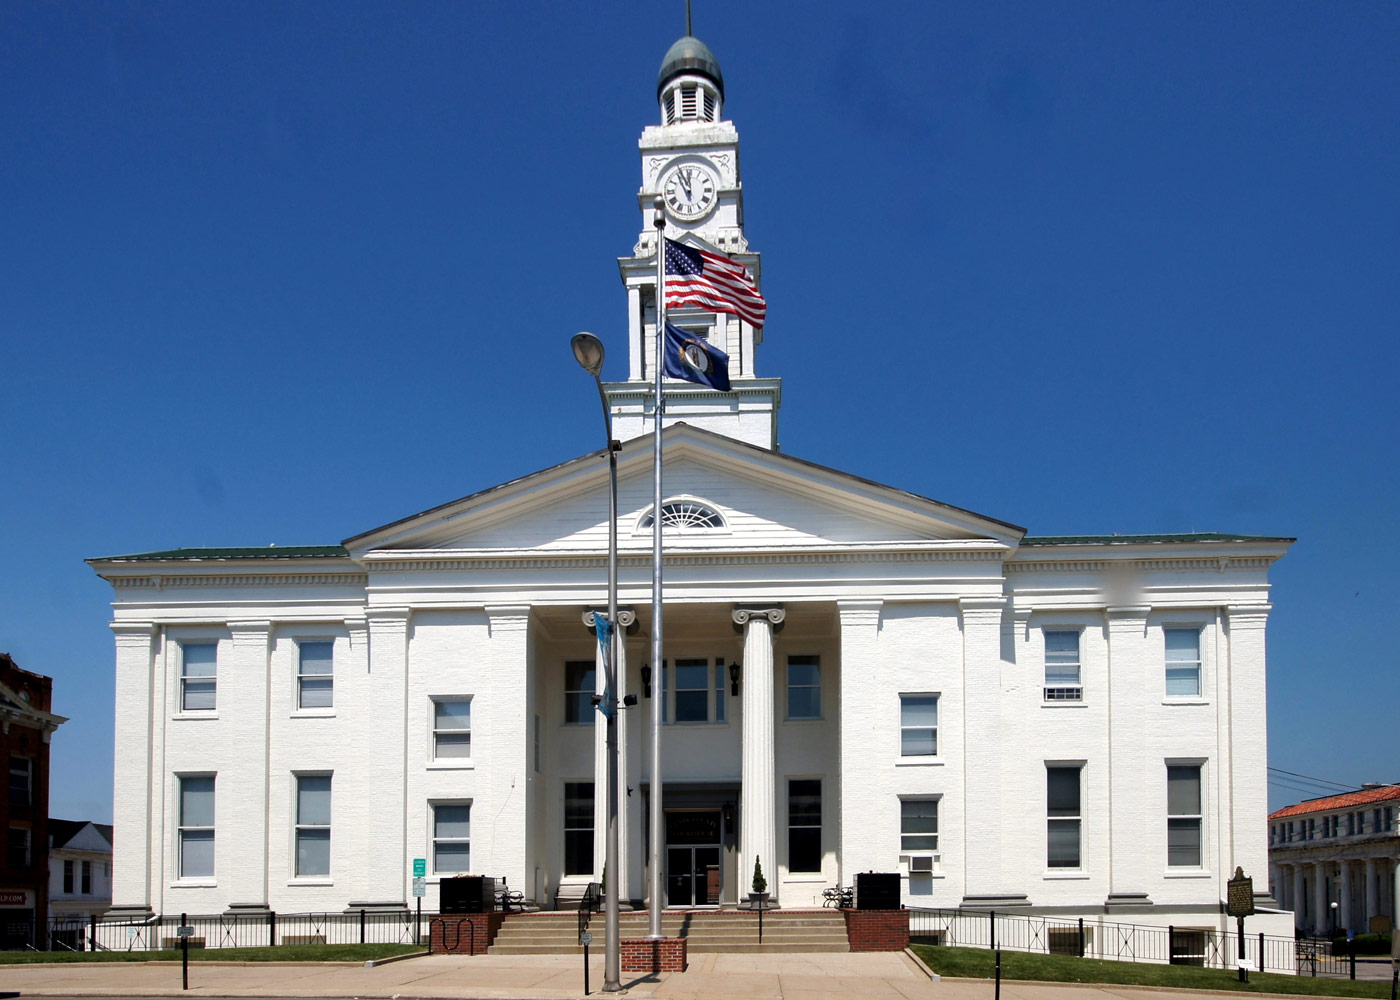 Clark County courthouse in Kentucky